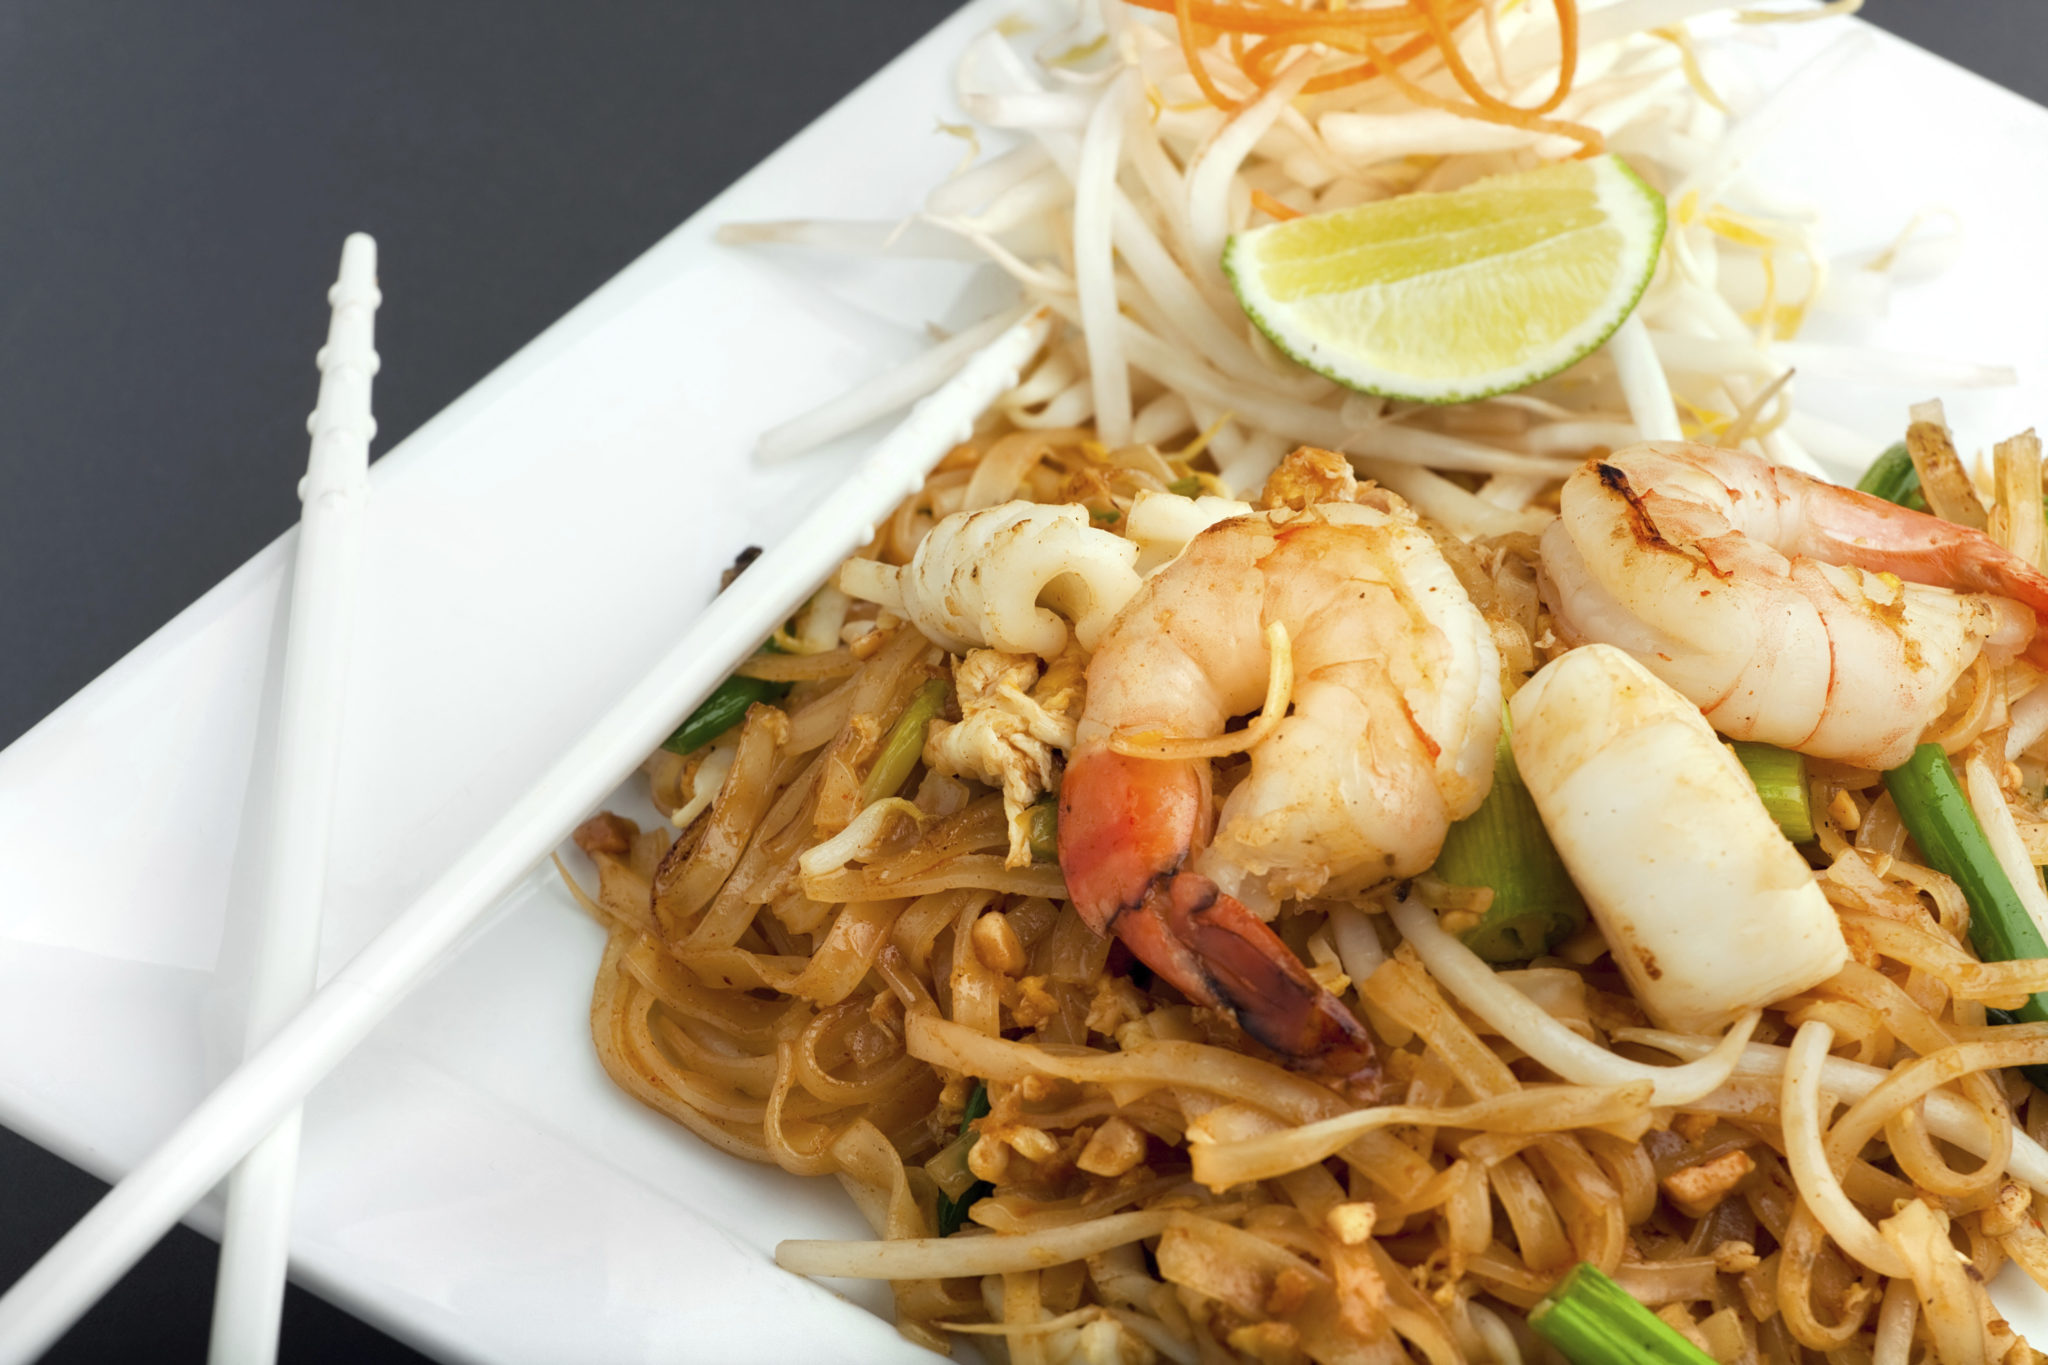 Many Eastern cuisines, like Thai food, balance a complex blend of different exotic spices and flavorings. 